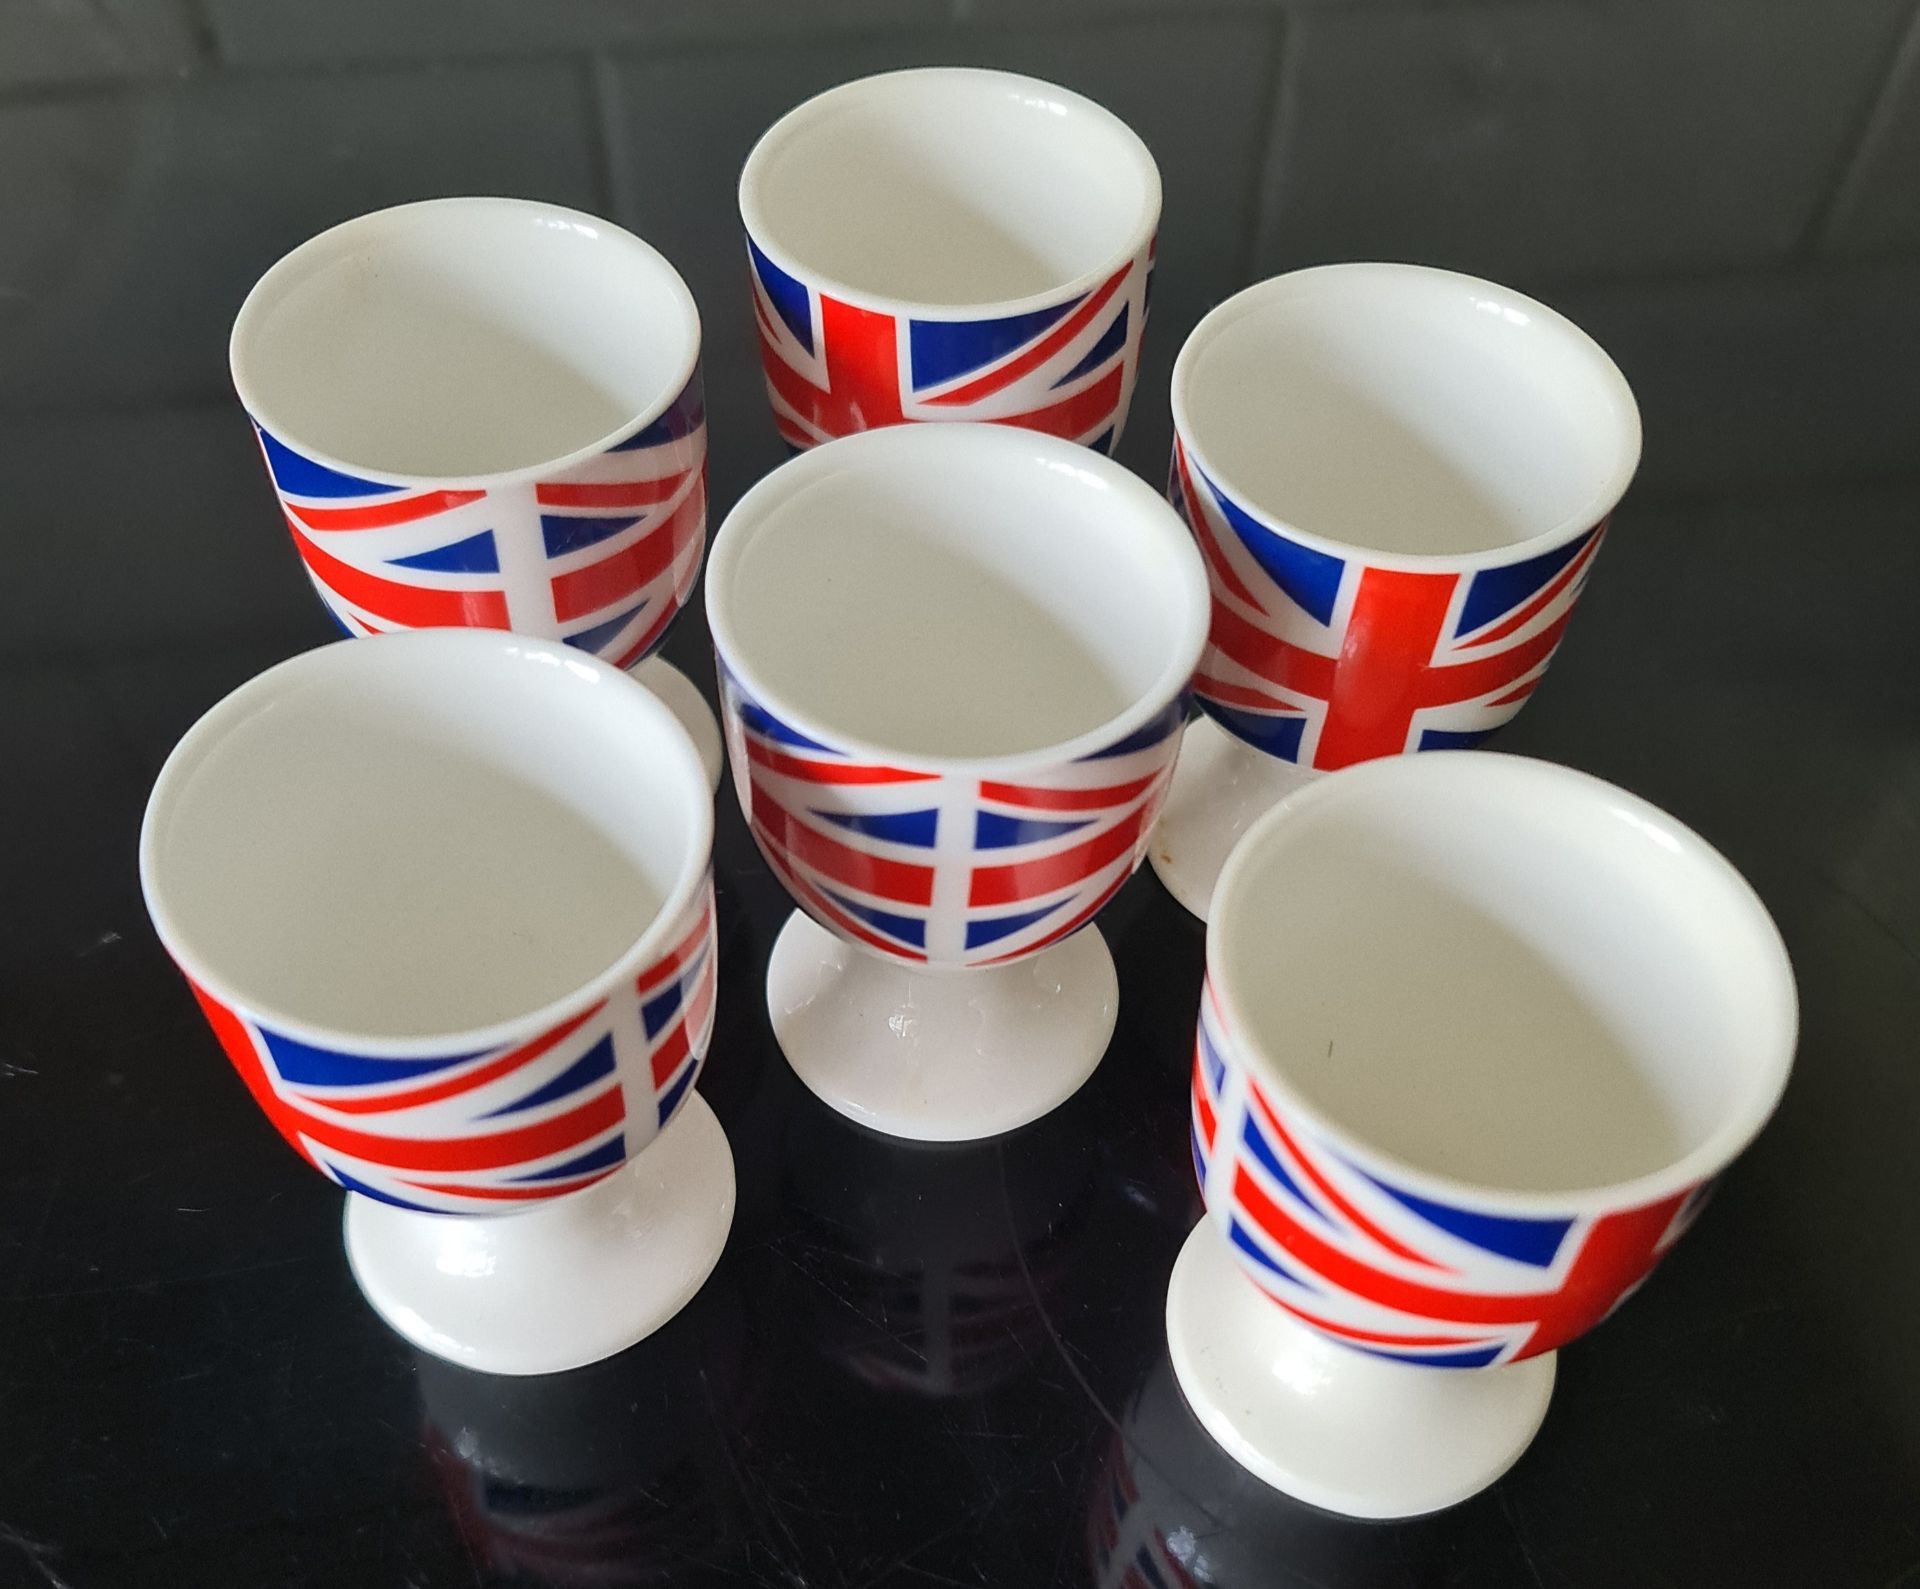 Vintage 6 Egg Cups With Union Jack Flags on Them